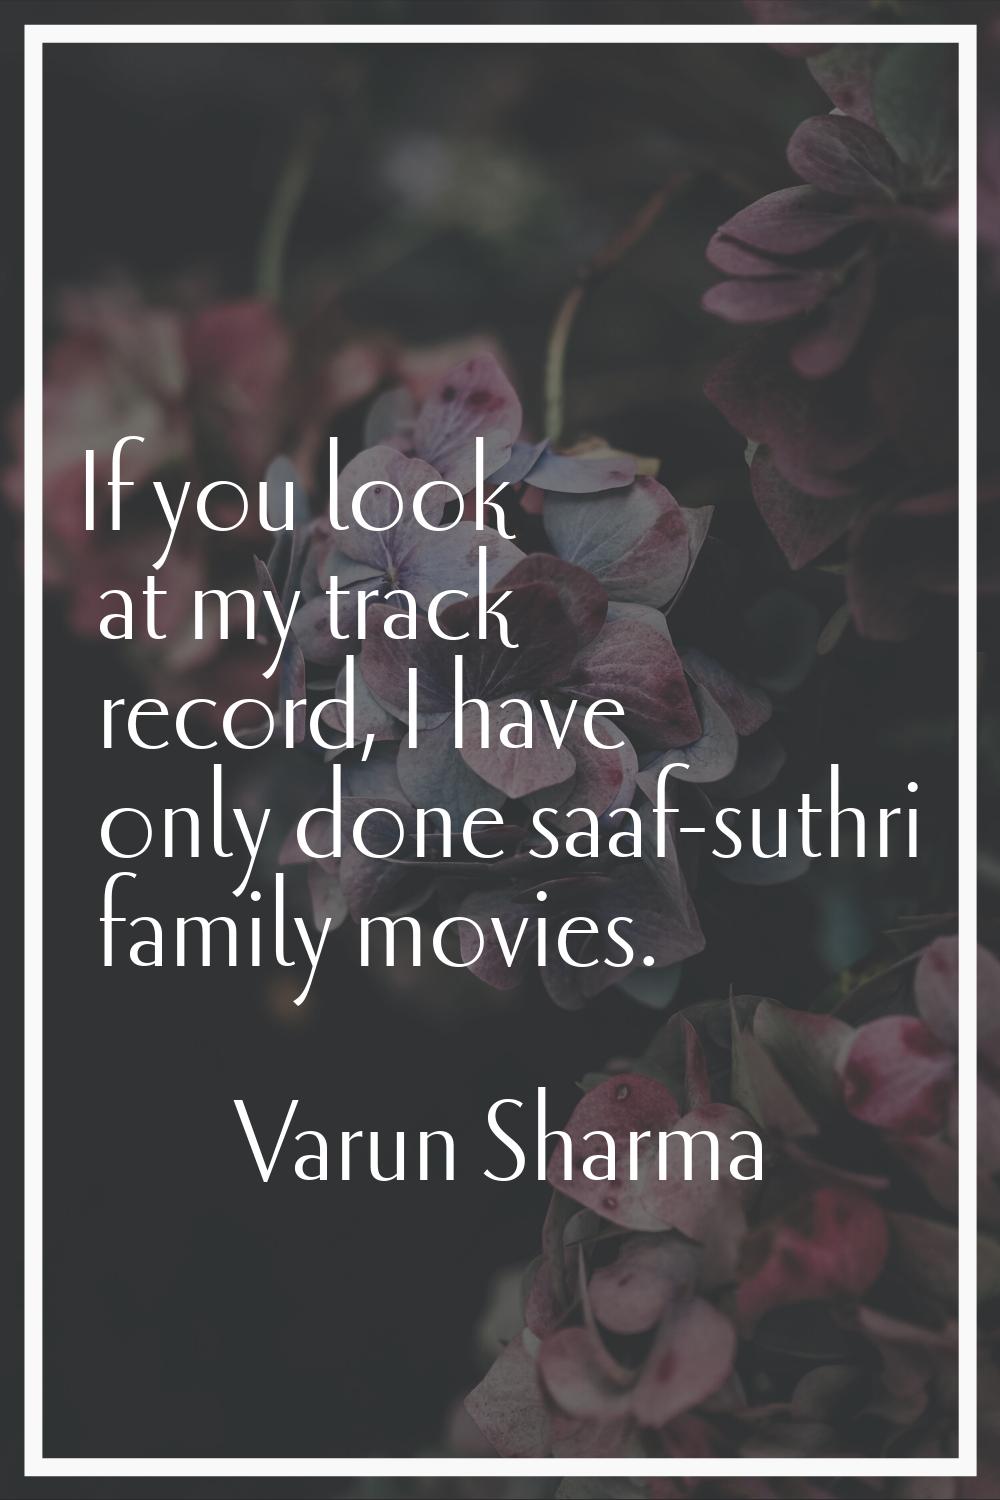 If you look at my track record, I have only done saaf-suthri family movies.